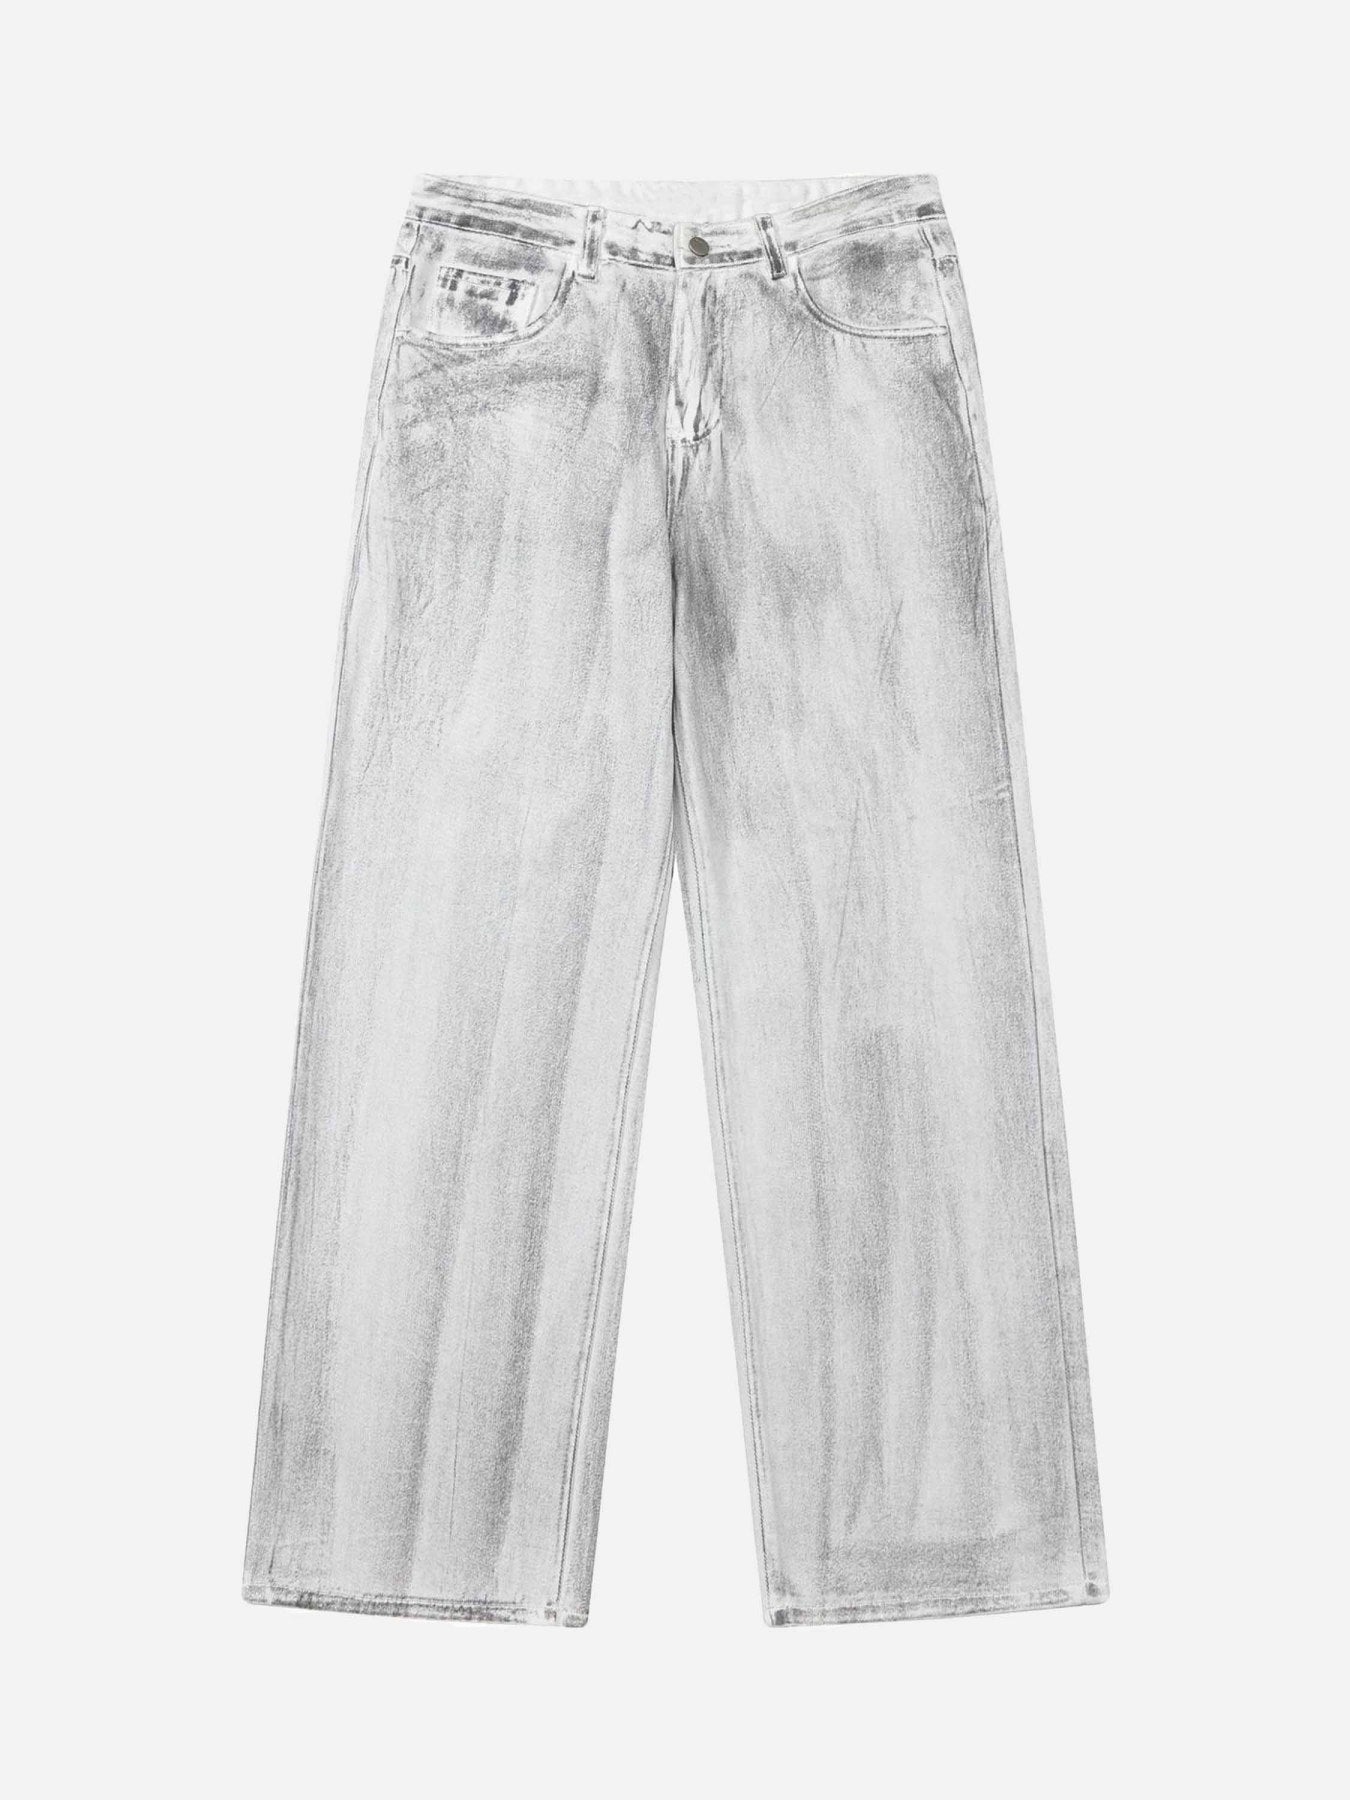 Thesupermade Hip Hop Aged Straight Leg Jeans - 1932